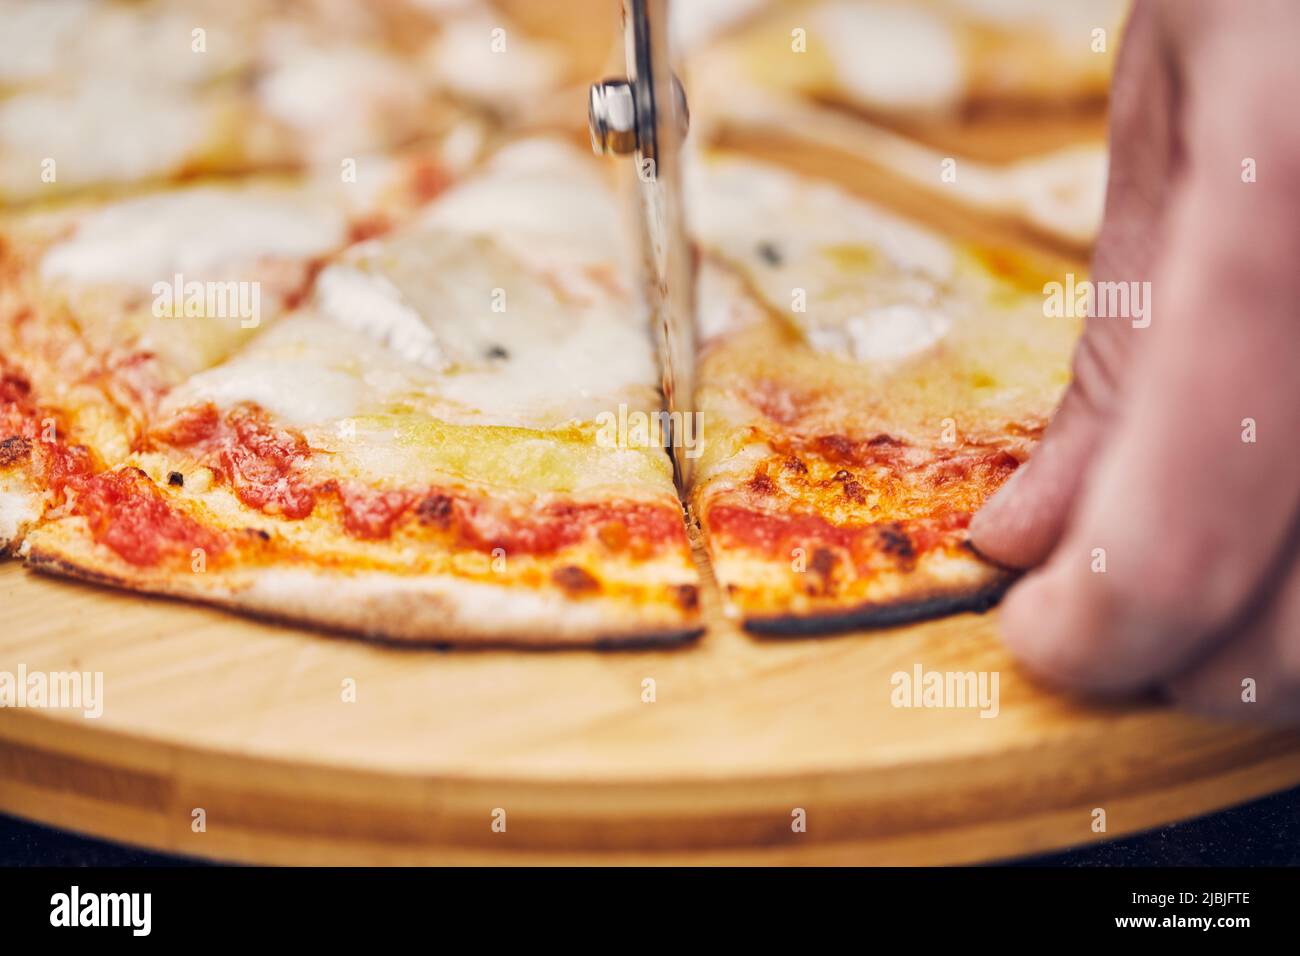 Cutting a pizza with a round pizza cutter. Front view. Stock Photo